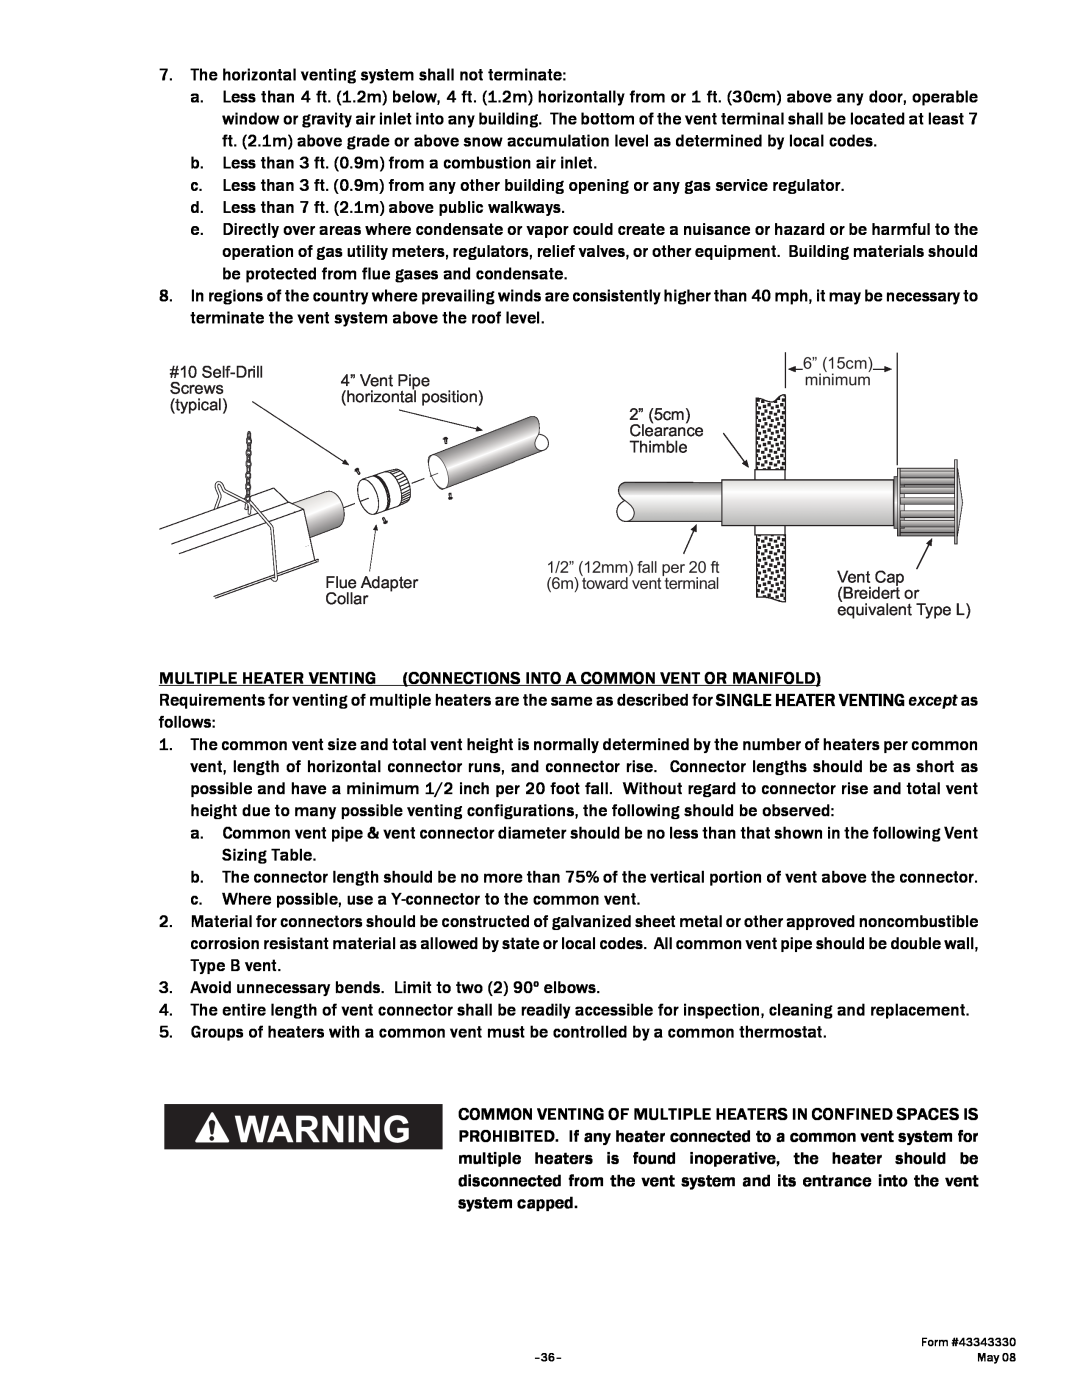 Gas-Fired Products PTU Series, PTS Series manual b.Less than 3 ft. 0.9m from a combustion air inlet 